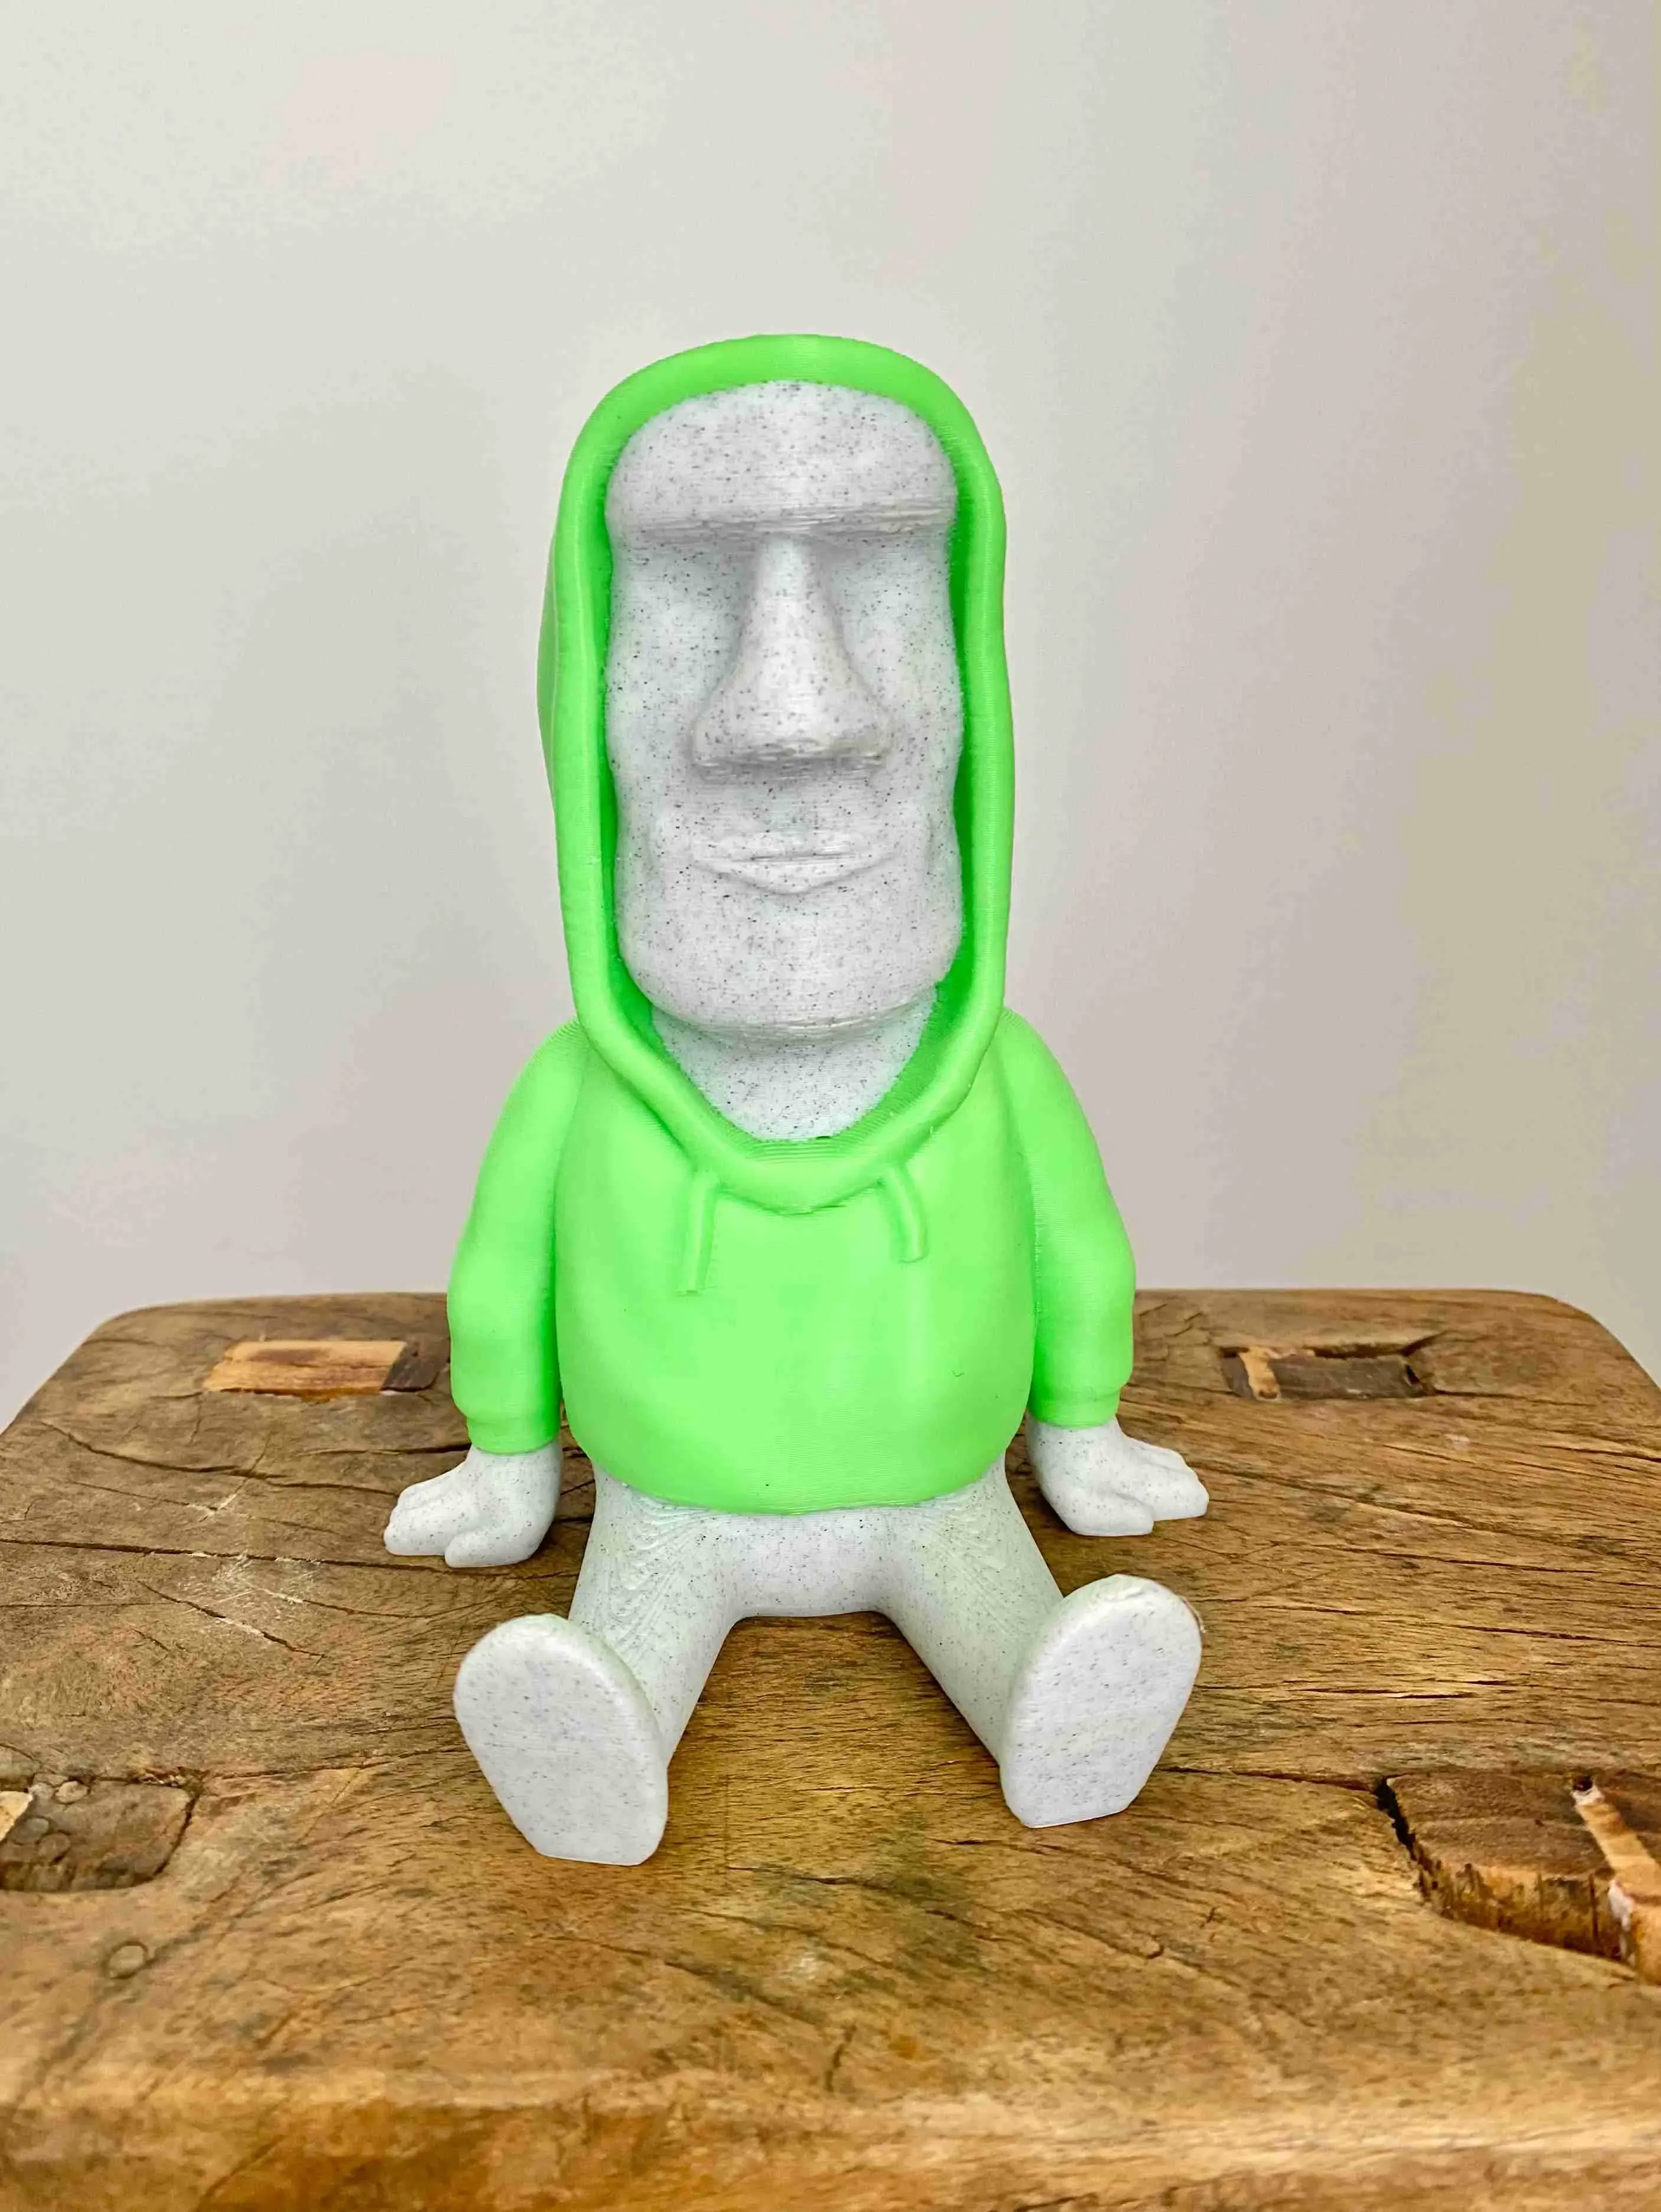 Moai Phone Holder - Multiparts - No supports